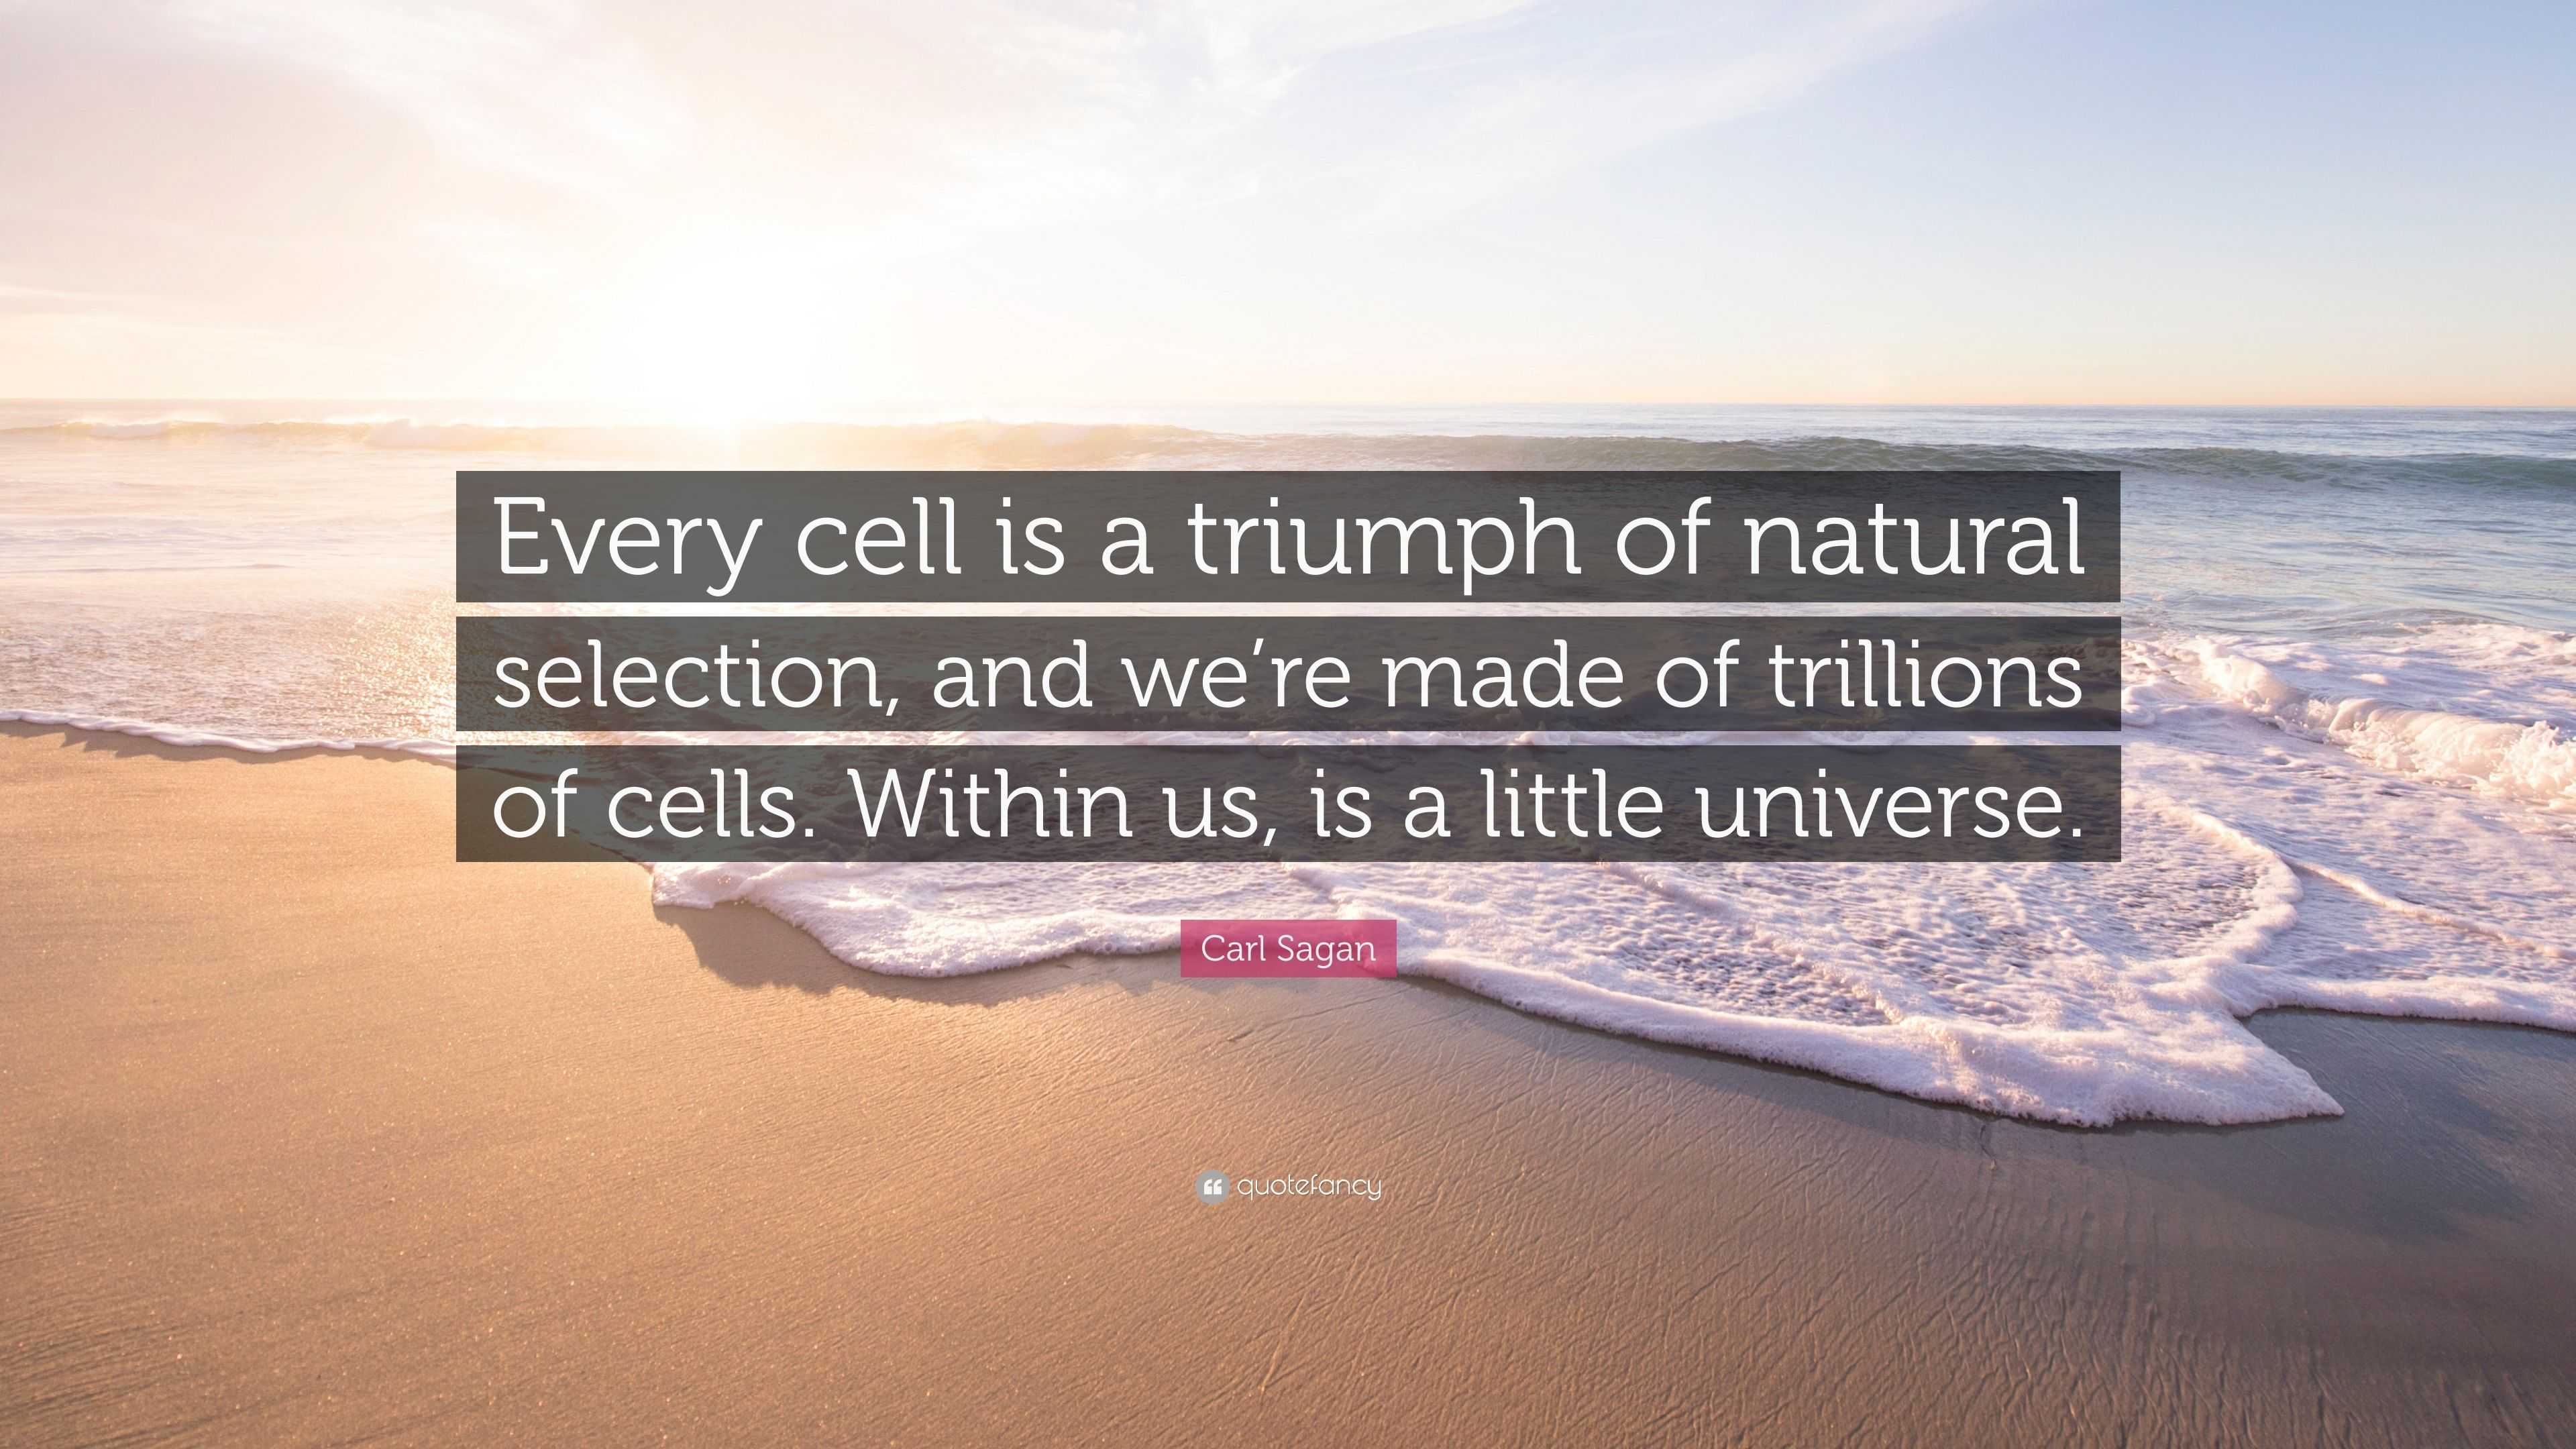 Carl Sagan Quote: “Every cell is a triumph of natural selection, and we ...